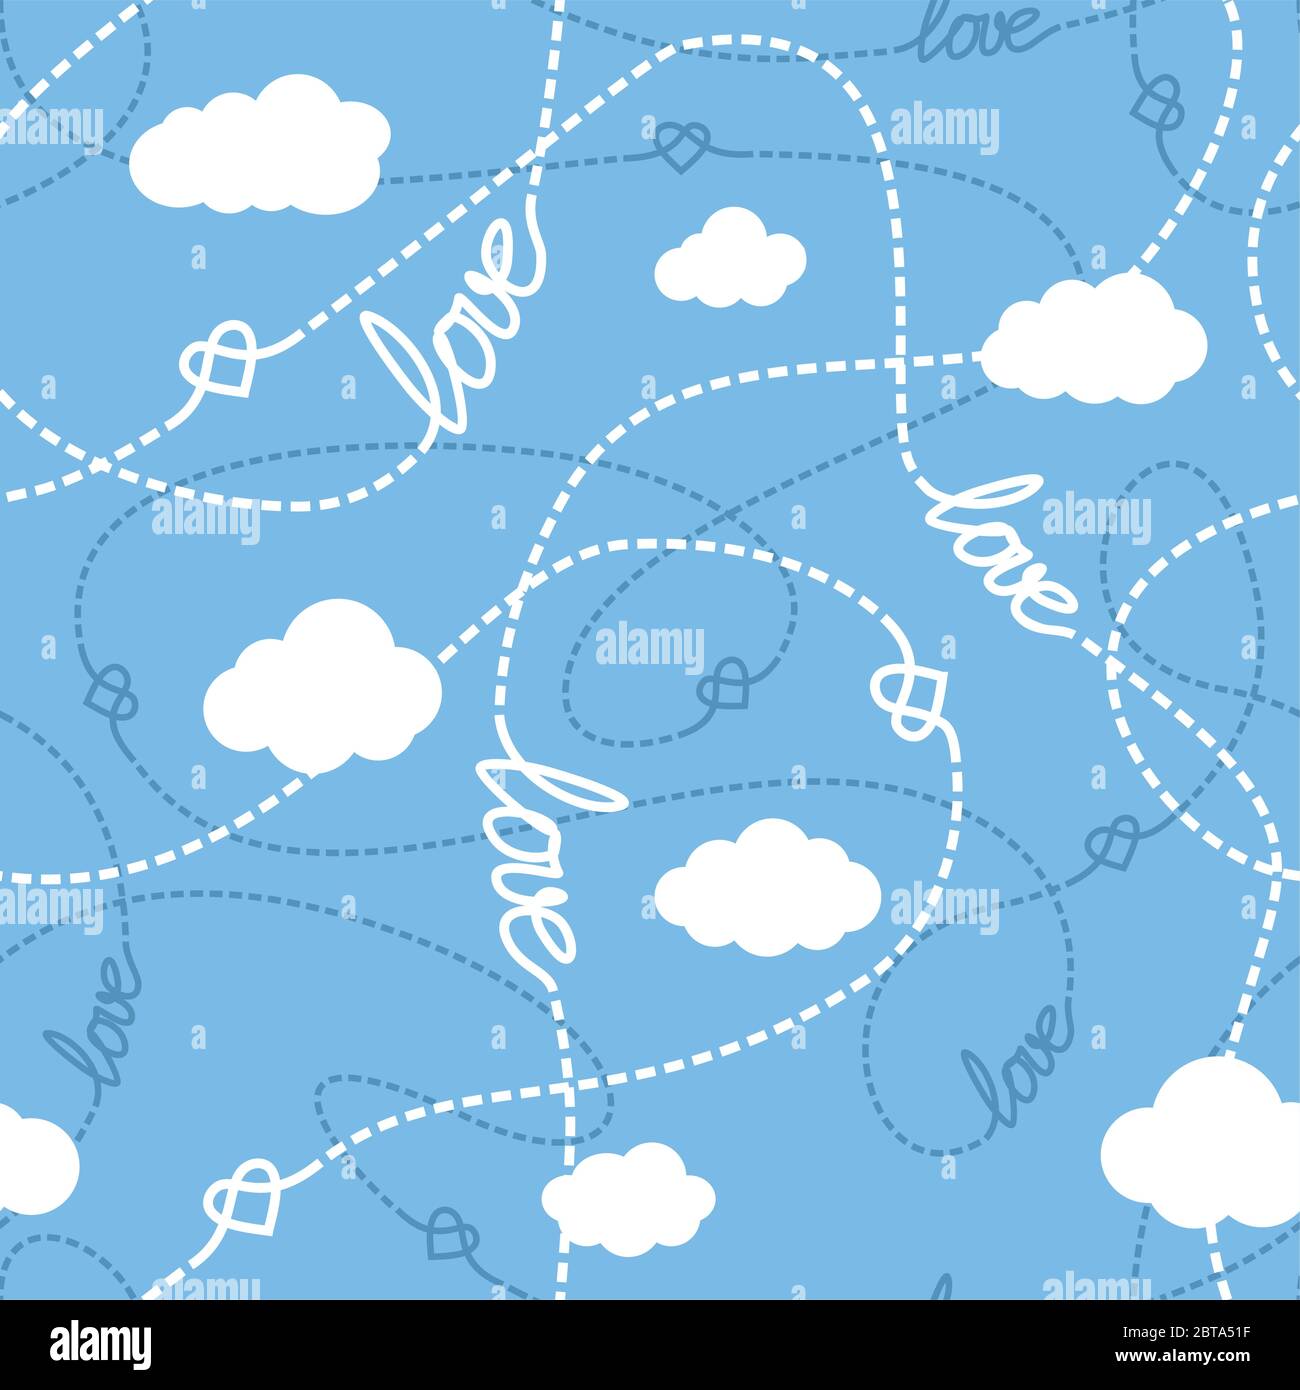 Vector seamless pattern with love words, hearts, tangled lines and clouds. Repeating abstract background for romantic design. Love conceptual texture. Stock Vector